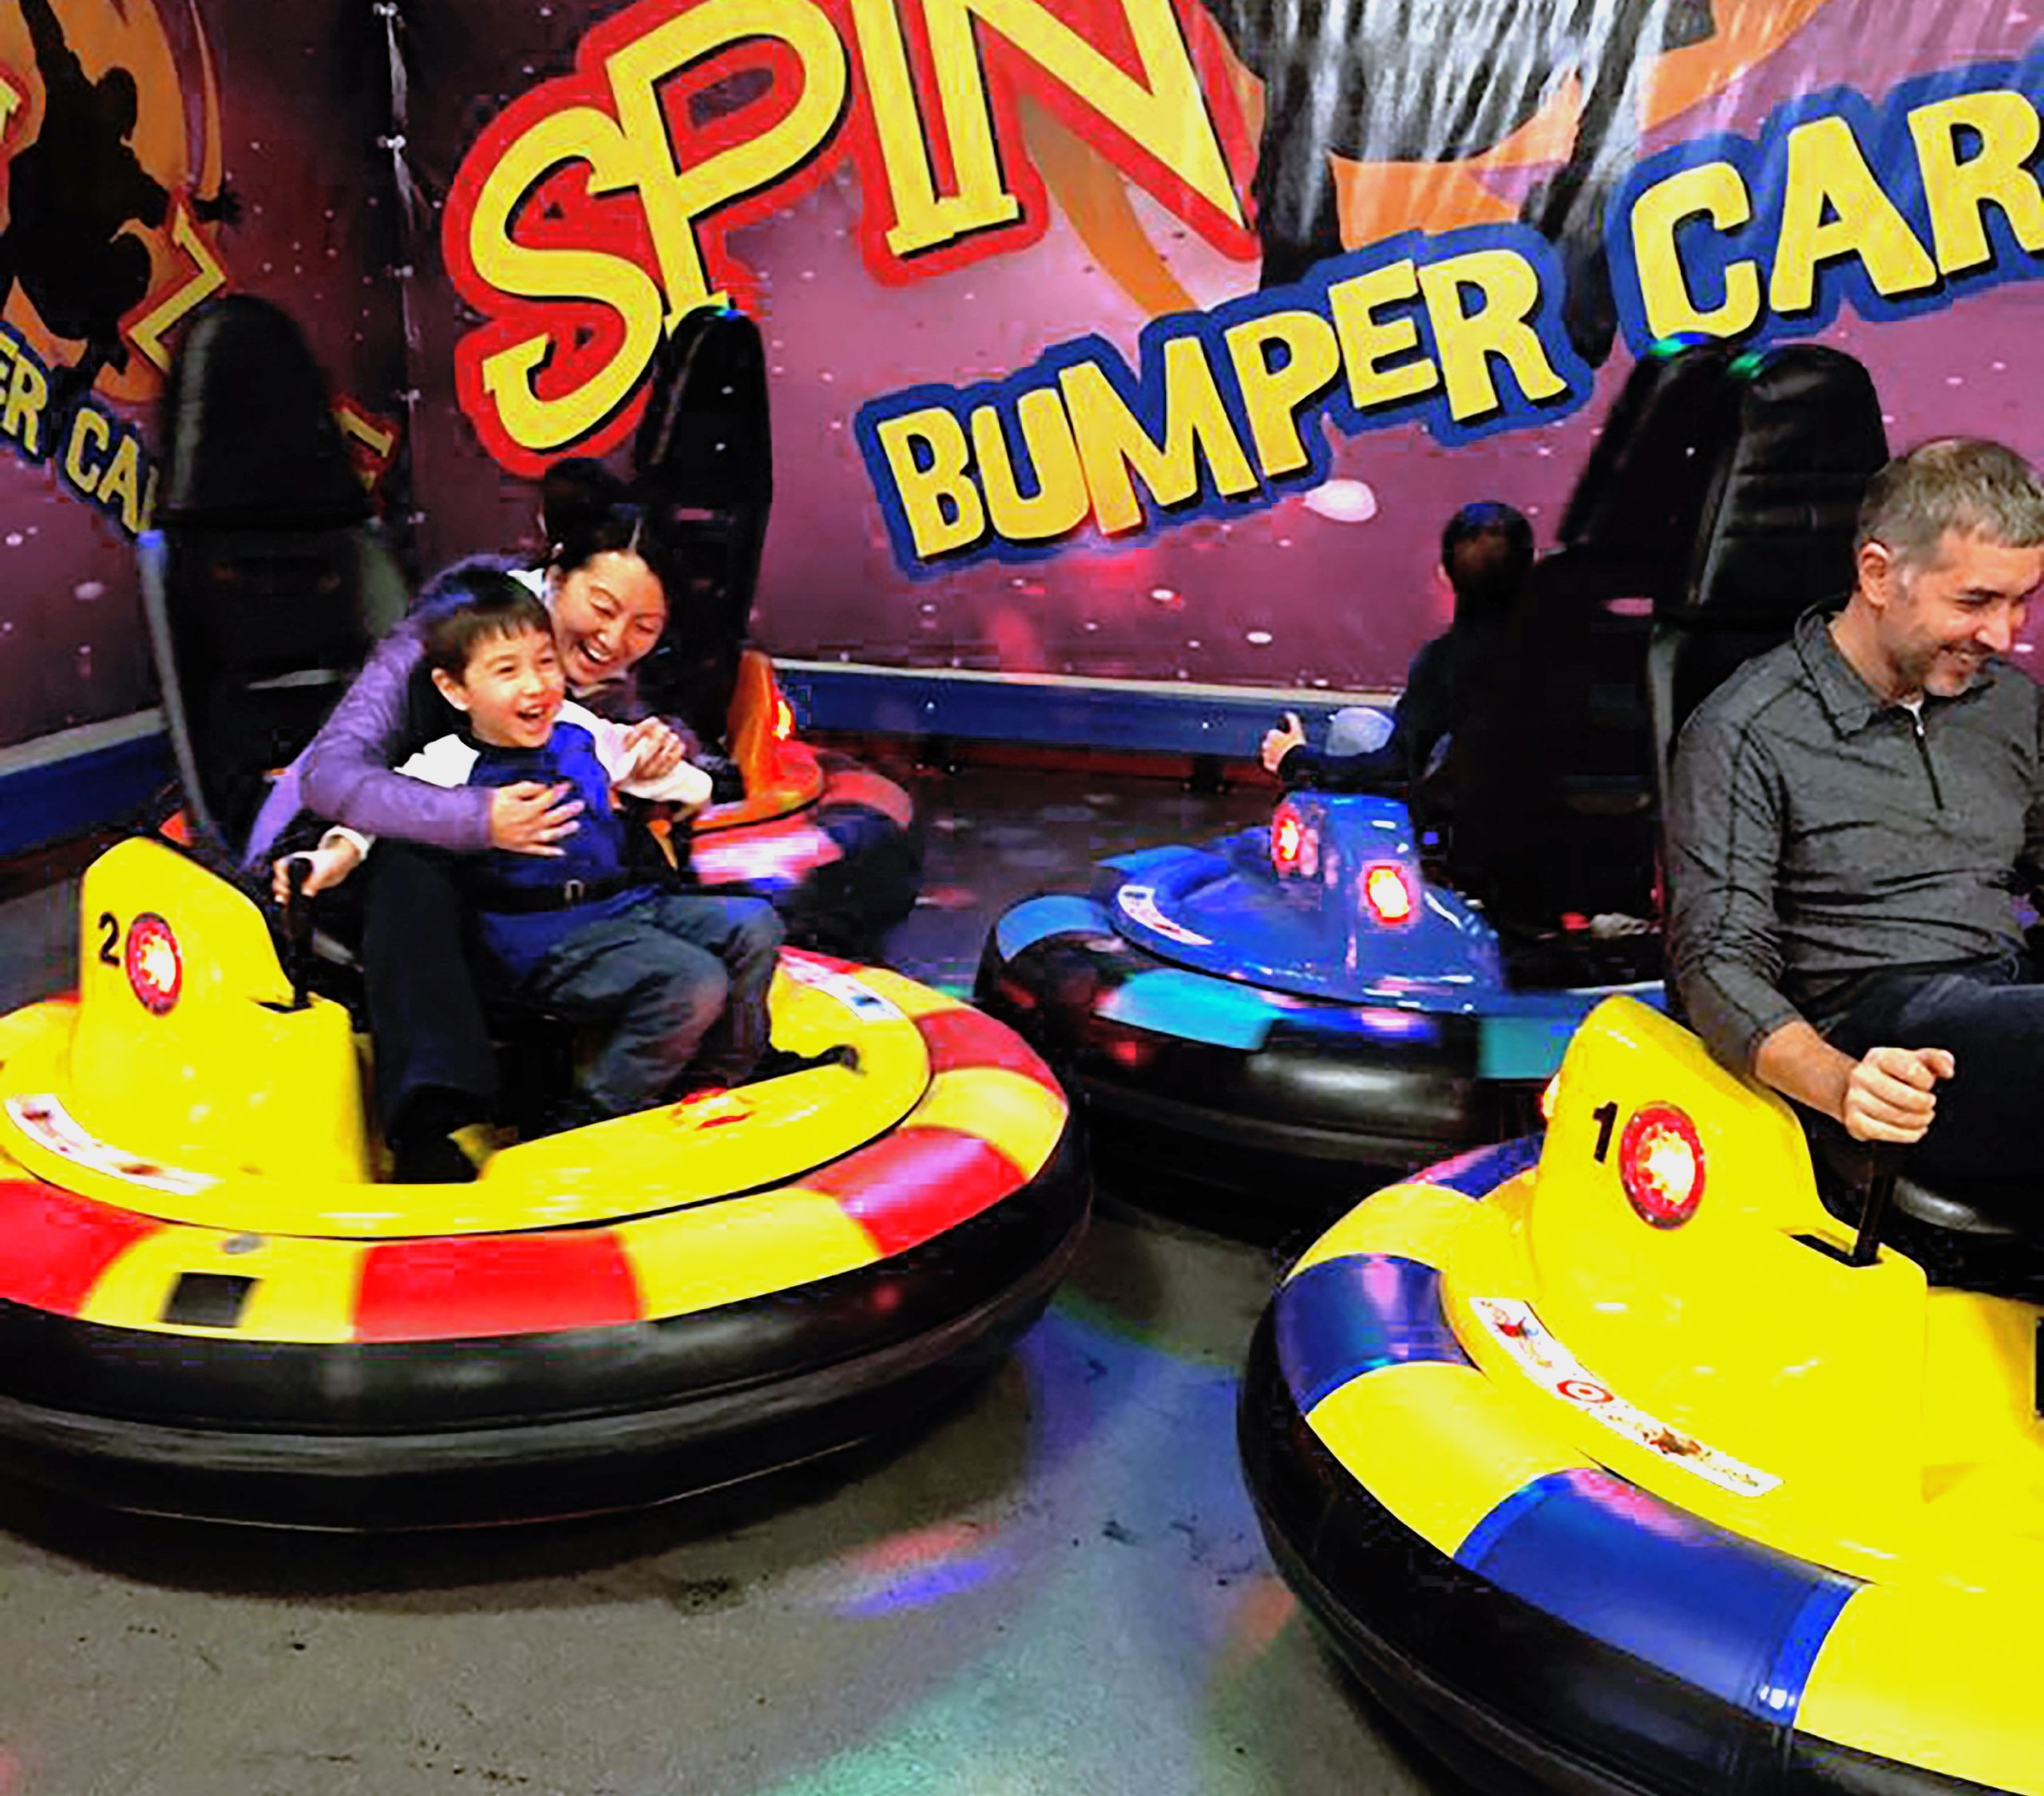 A mother and son ride a bumper car, both smiling and having family fun. They are about to bump into a man on another car.